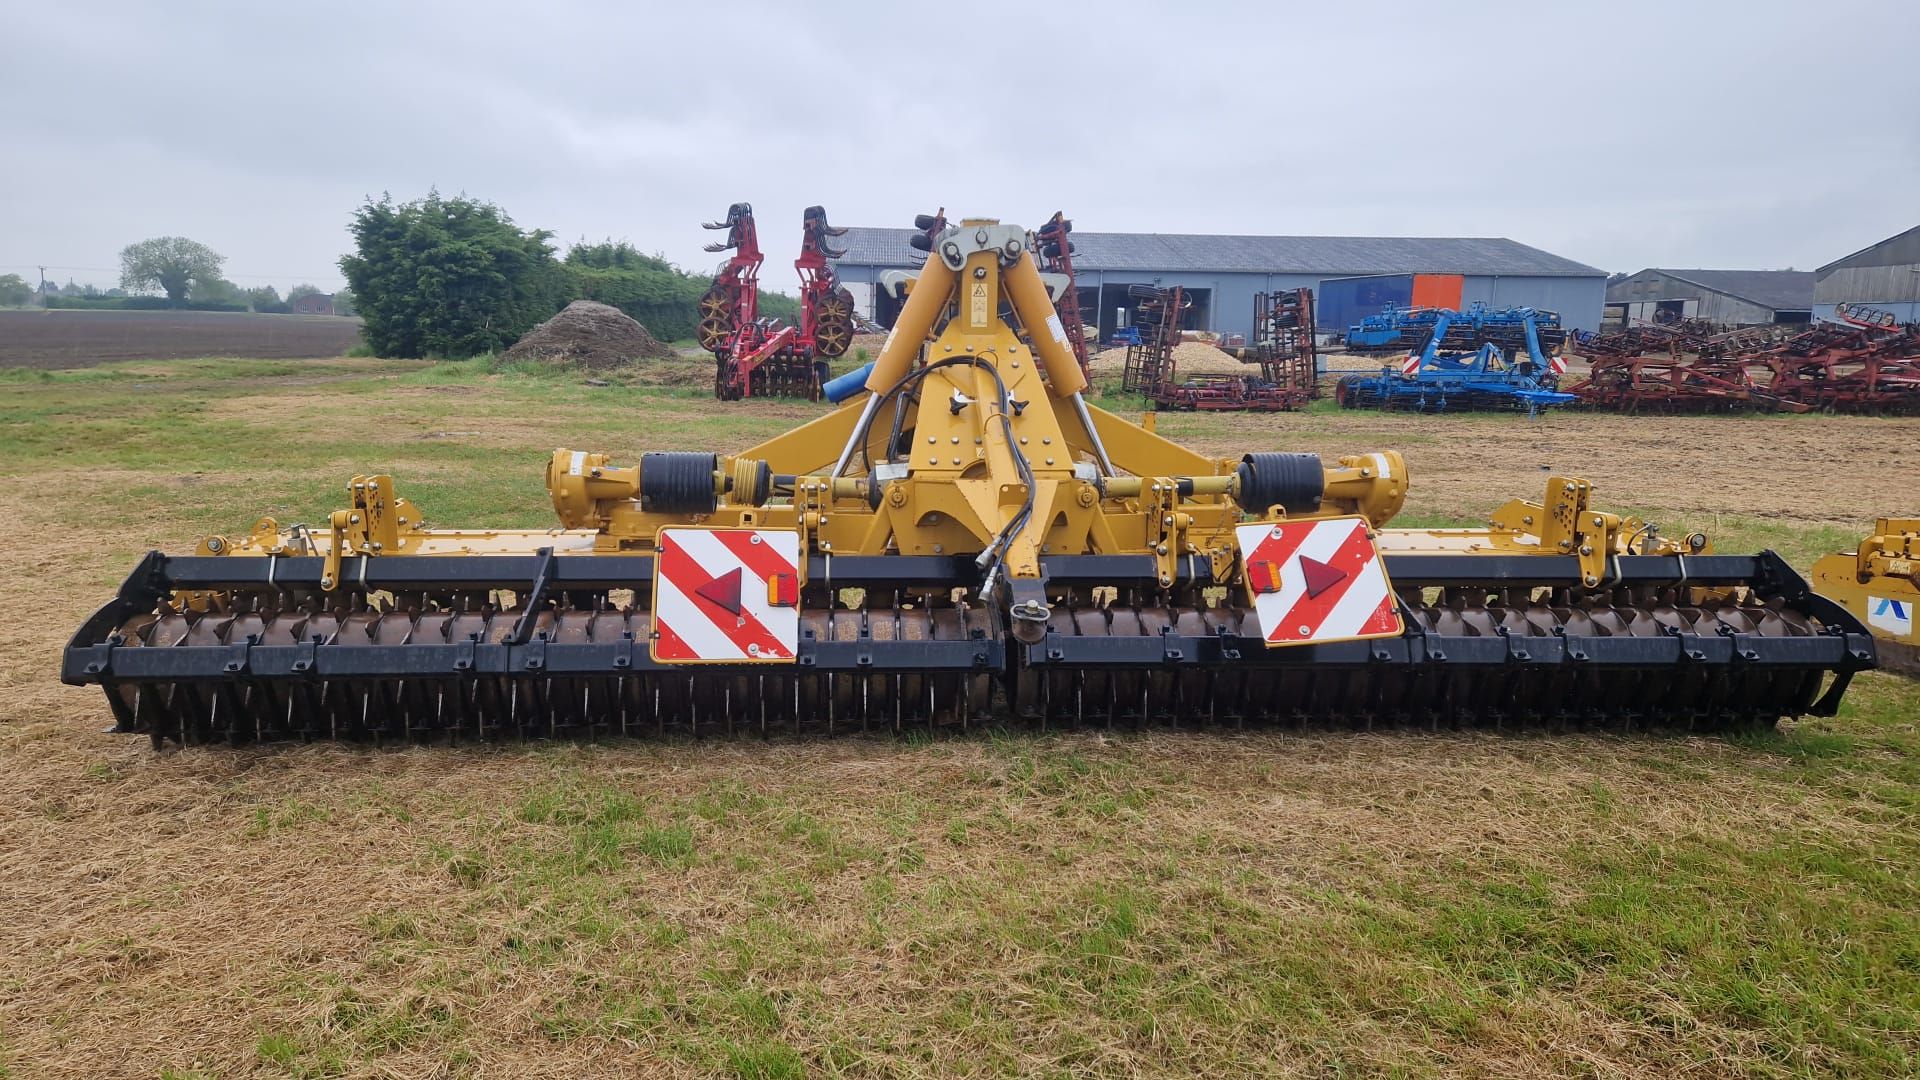 (17) Alpego Dmax 600 BR 6m folding power harrow, toothed packer roller, wheel eradicators, levelling - Image 9 of 10